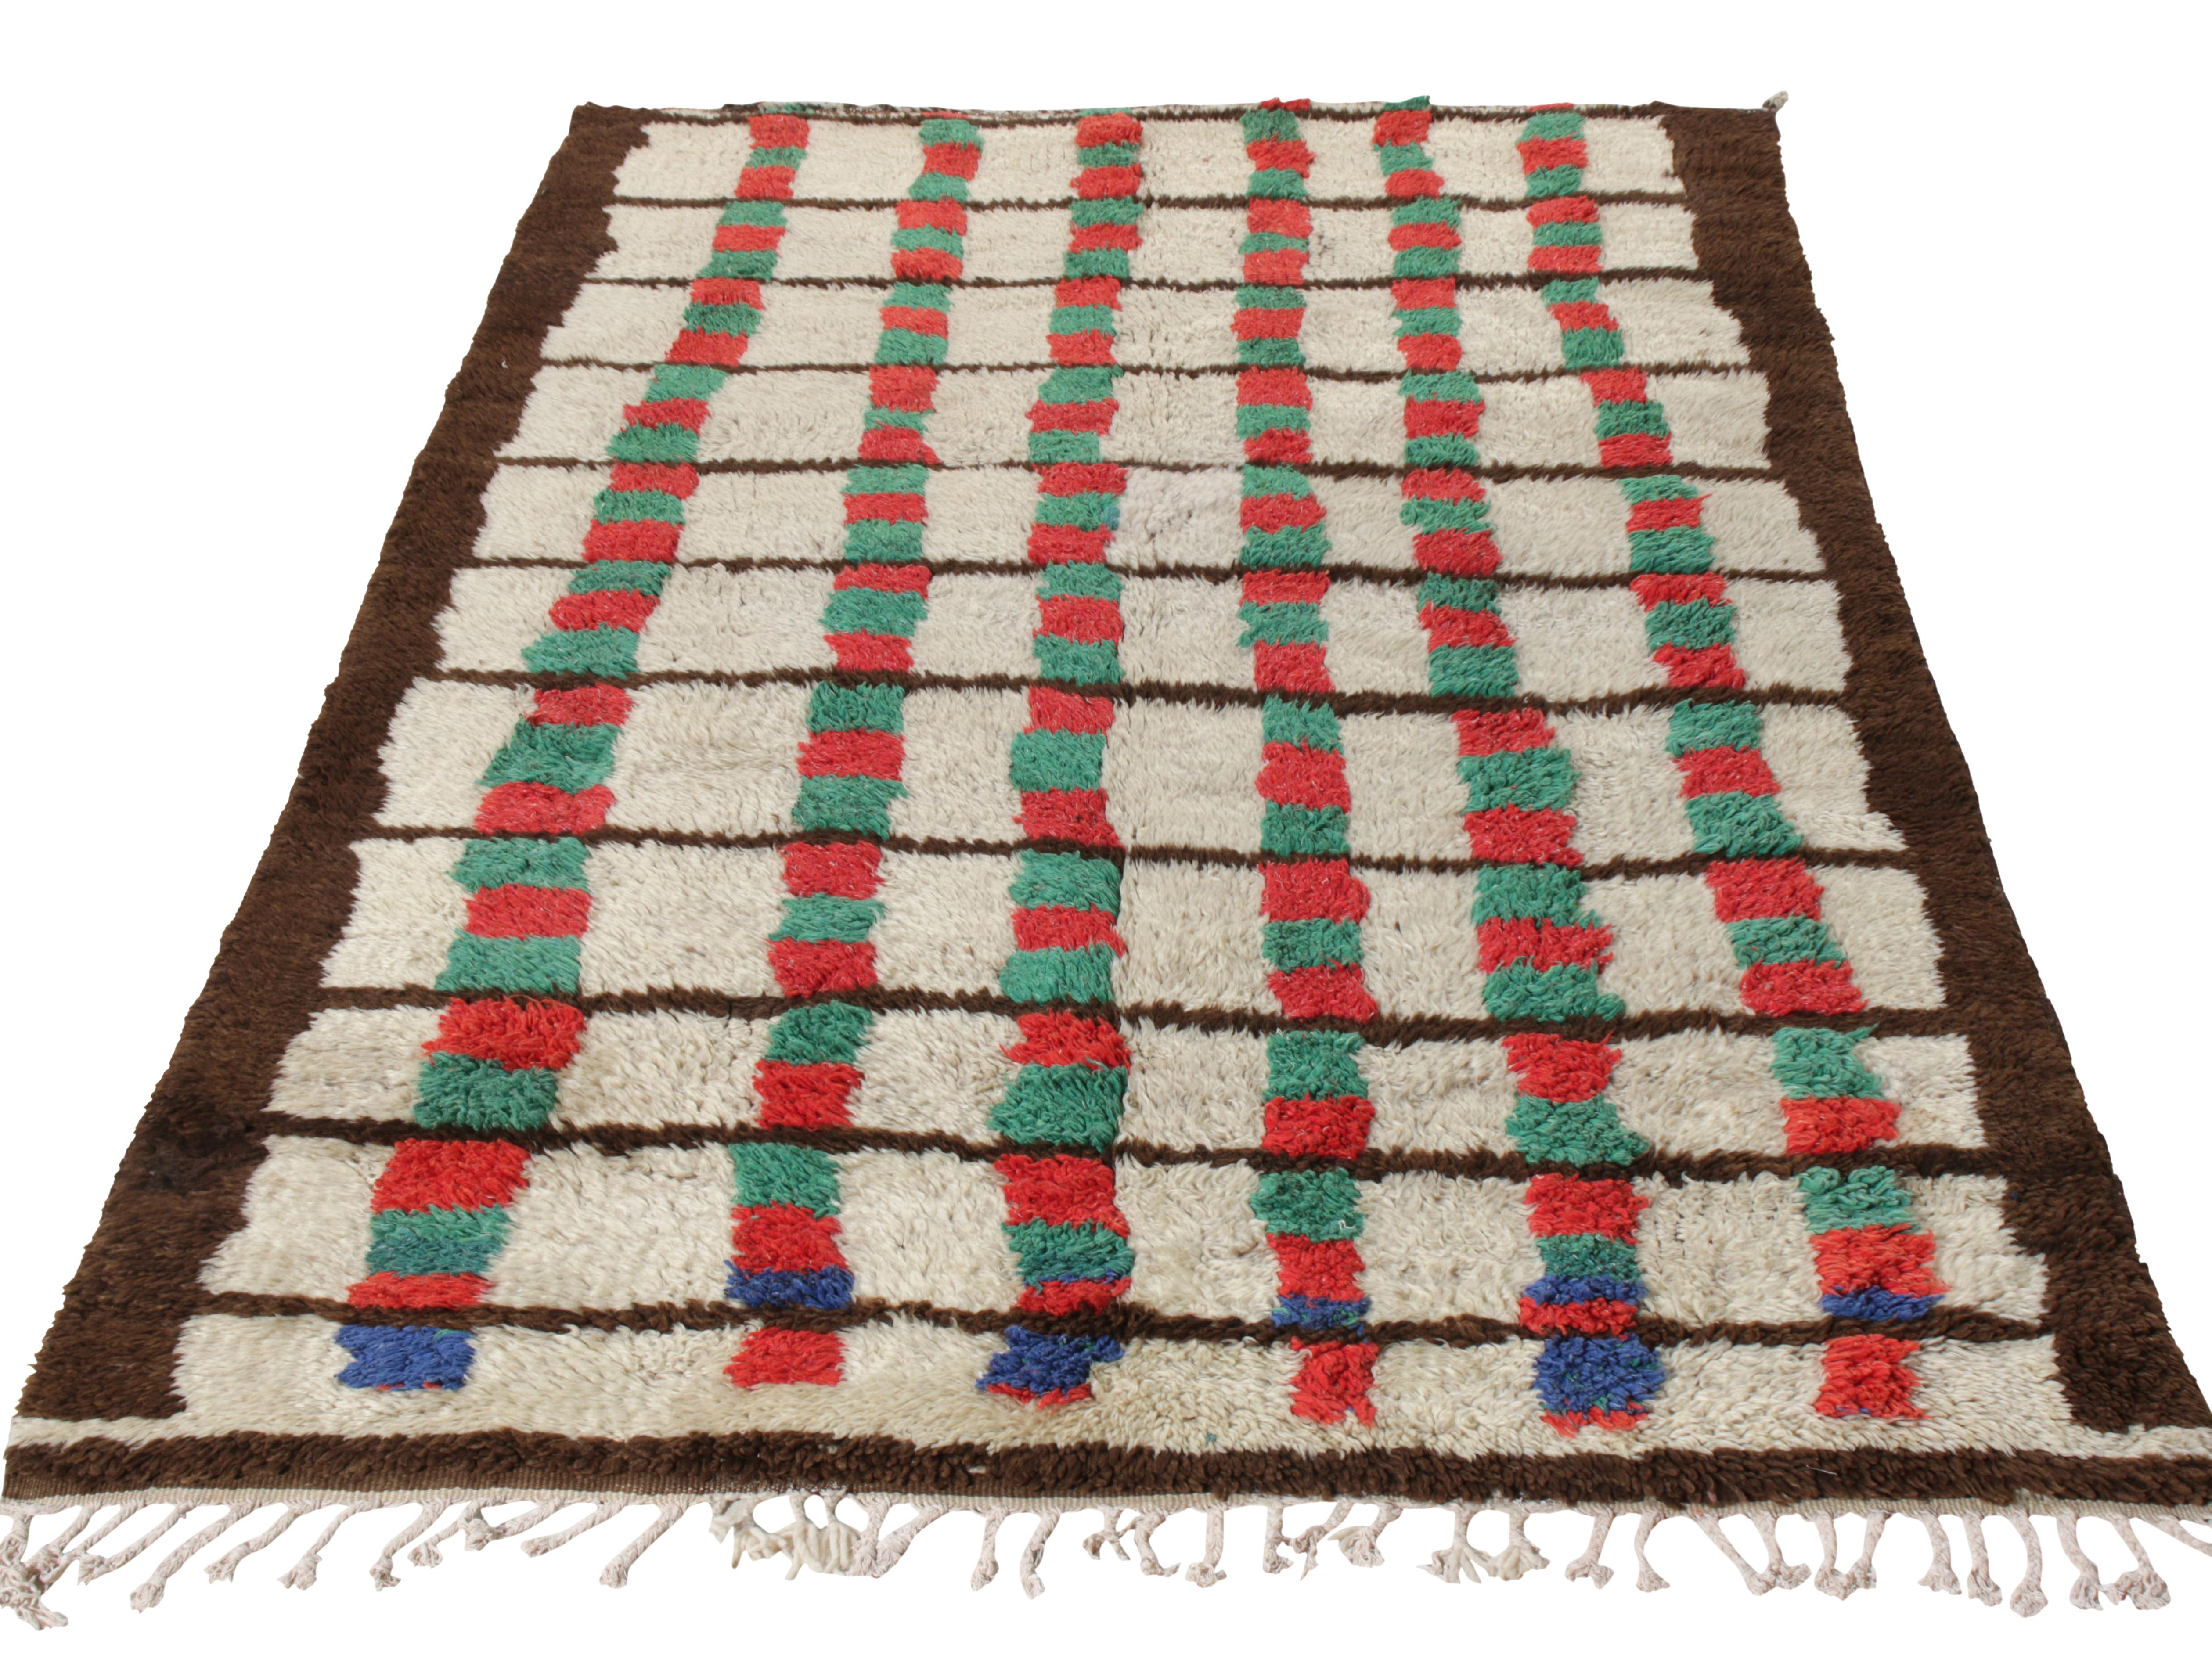 Hand knotted in wool with a high-low style from Morocco circa 1950-1960, this vintage 5x7 Moroccan rug is an exemplary piece in a multicoloured striped pattern. Playful hues of red and green sit comfortably on a beige-brown field, fabulously playing